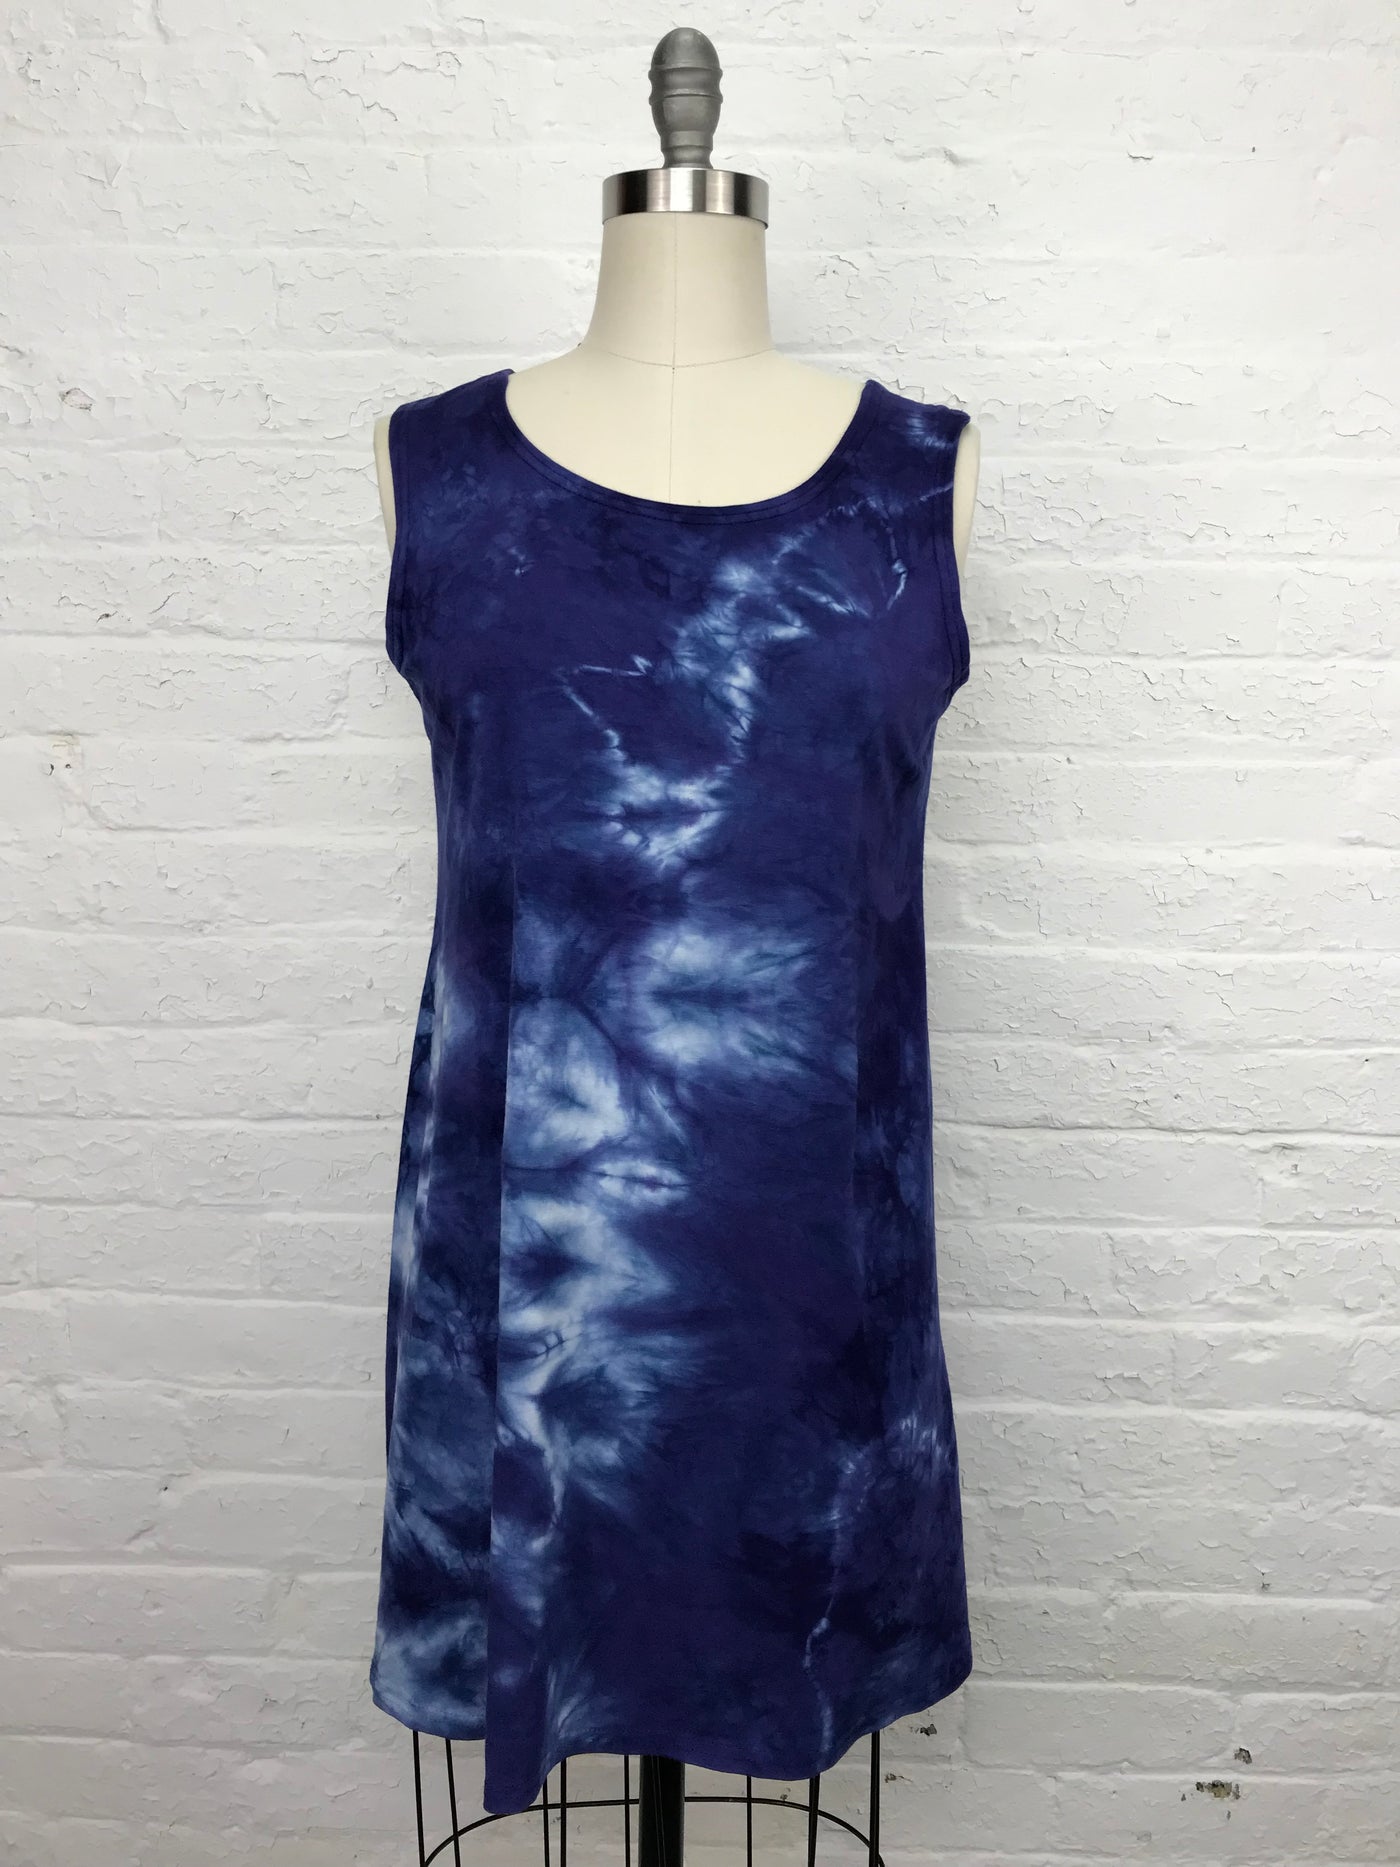 Eileen Mini Tank Tunic in Royal Navy Tangle - front view